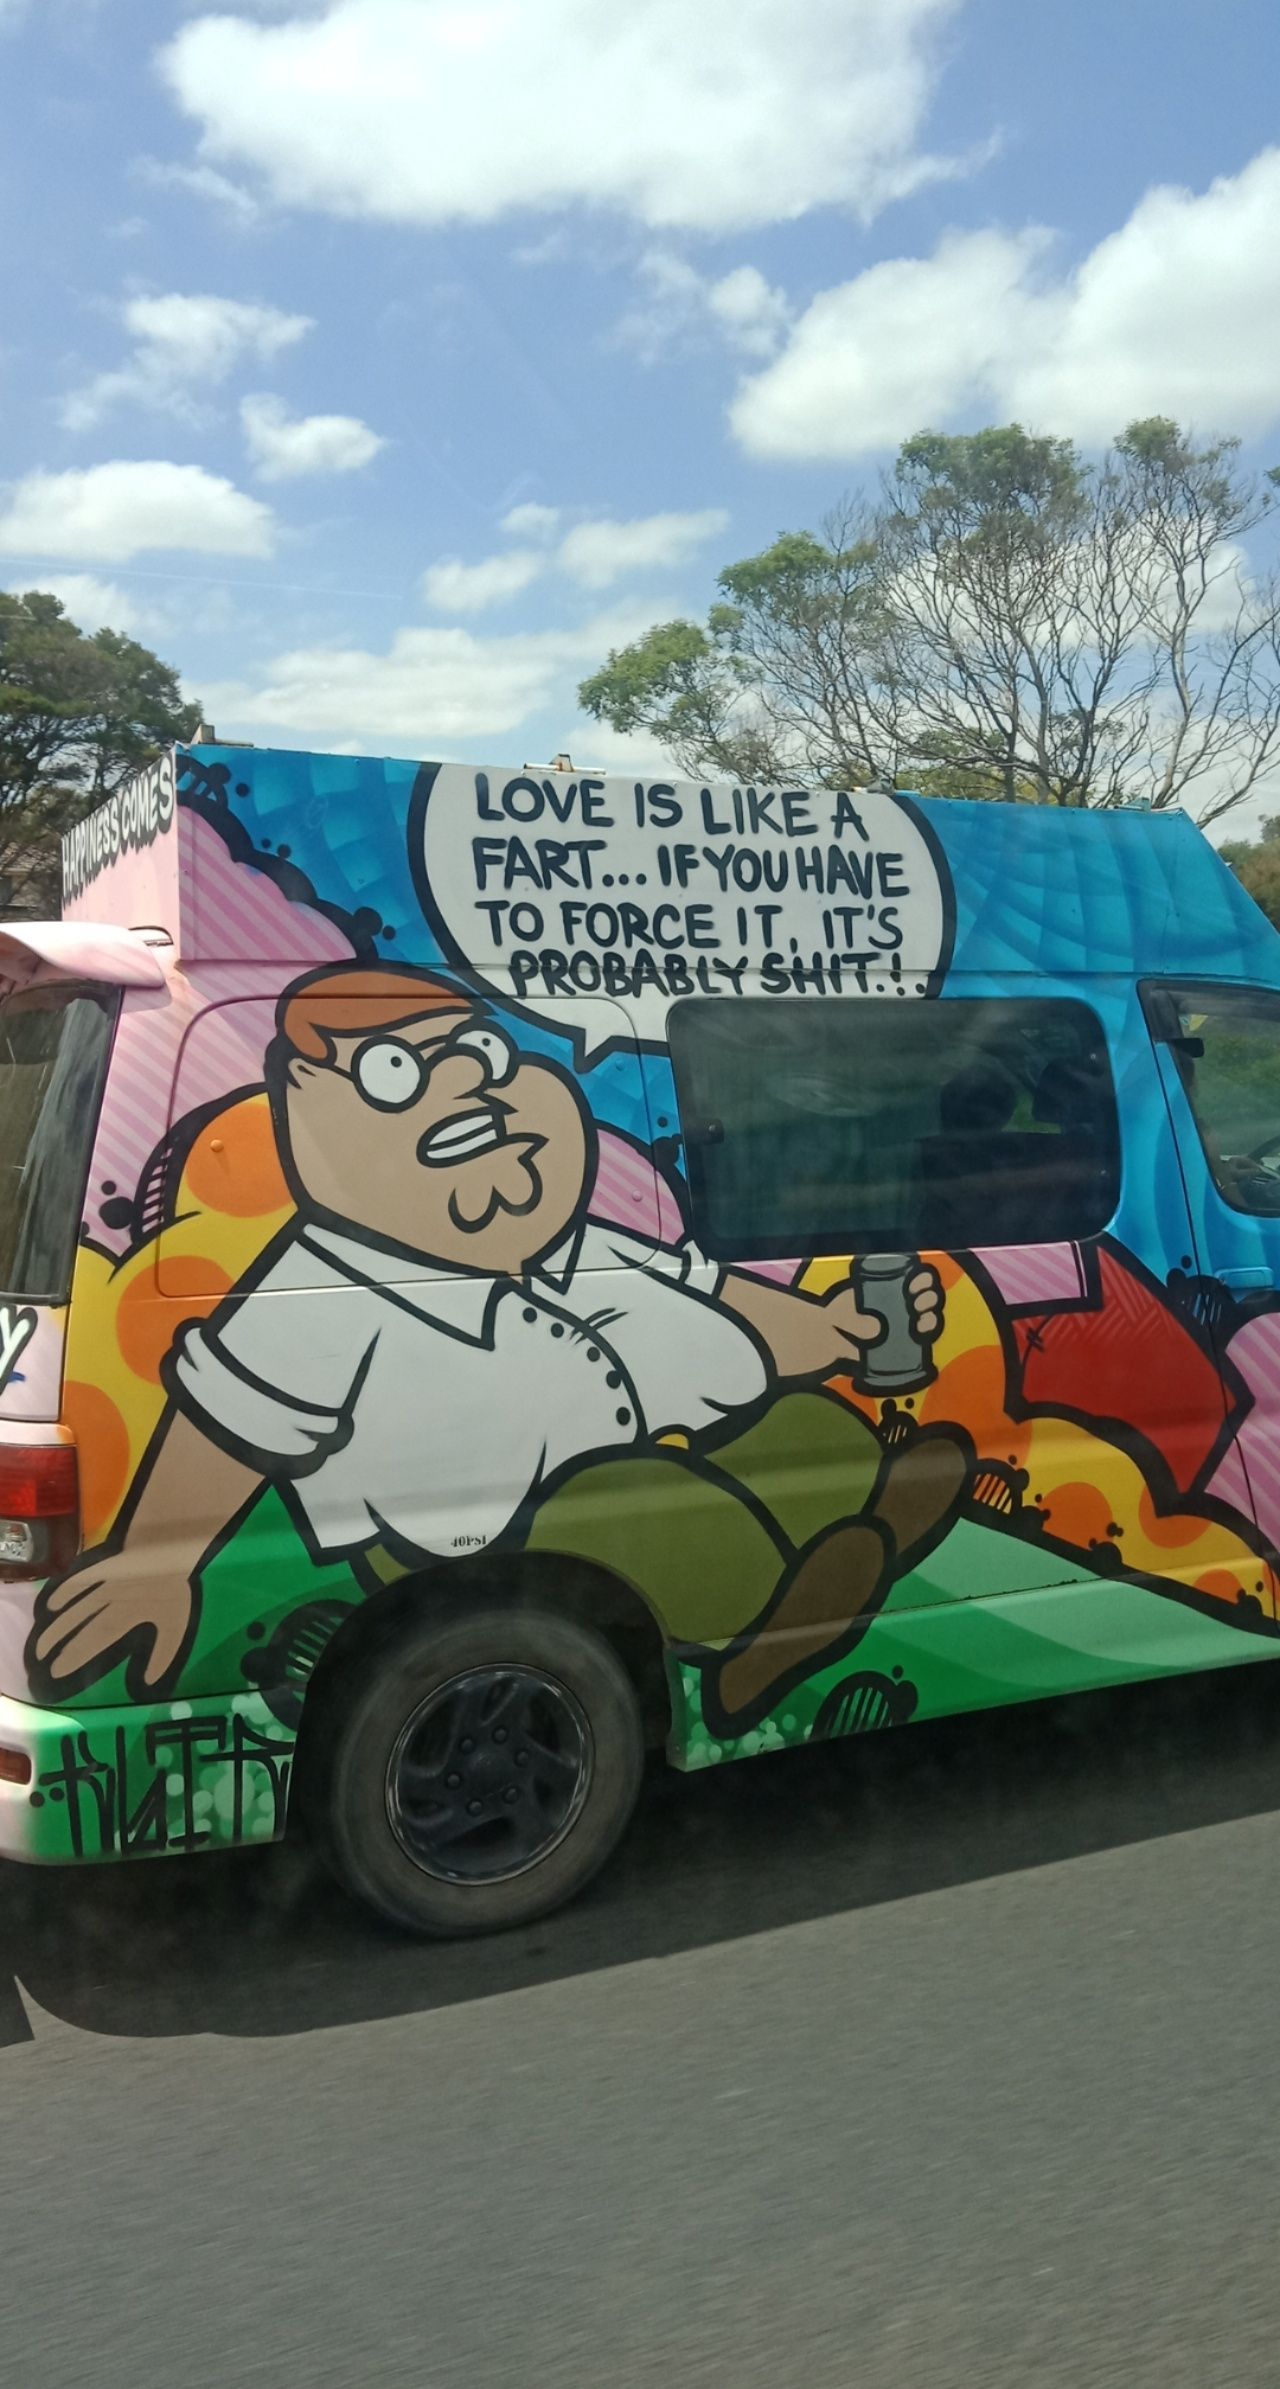 I live my life by Peter Griffin's famous quote